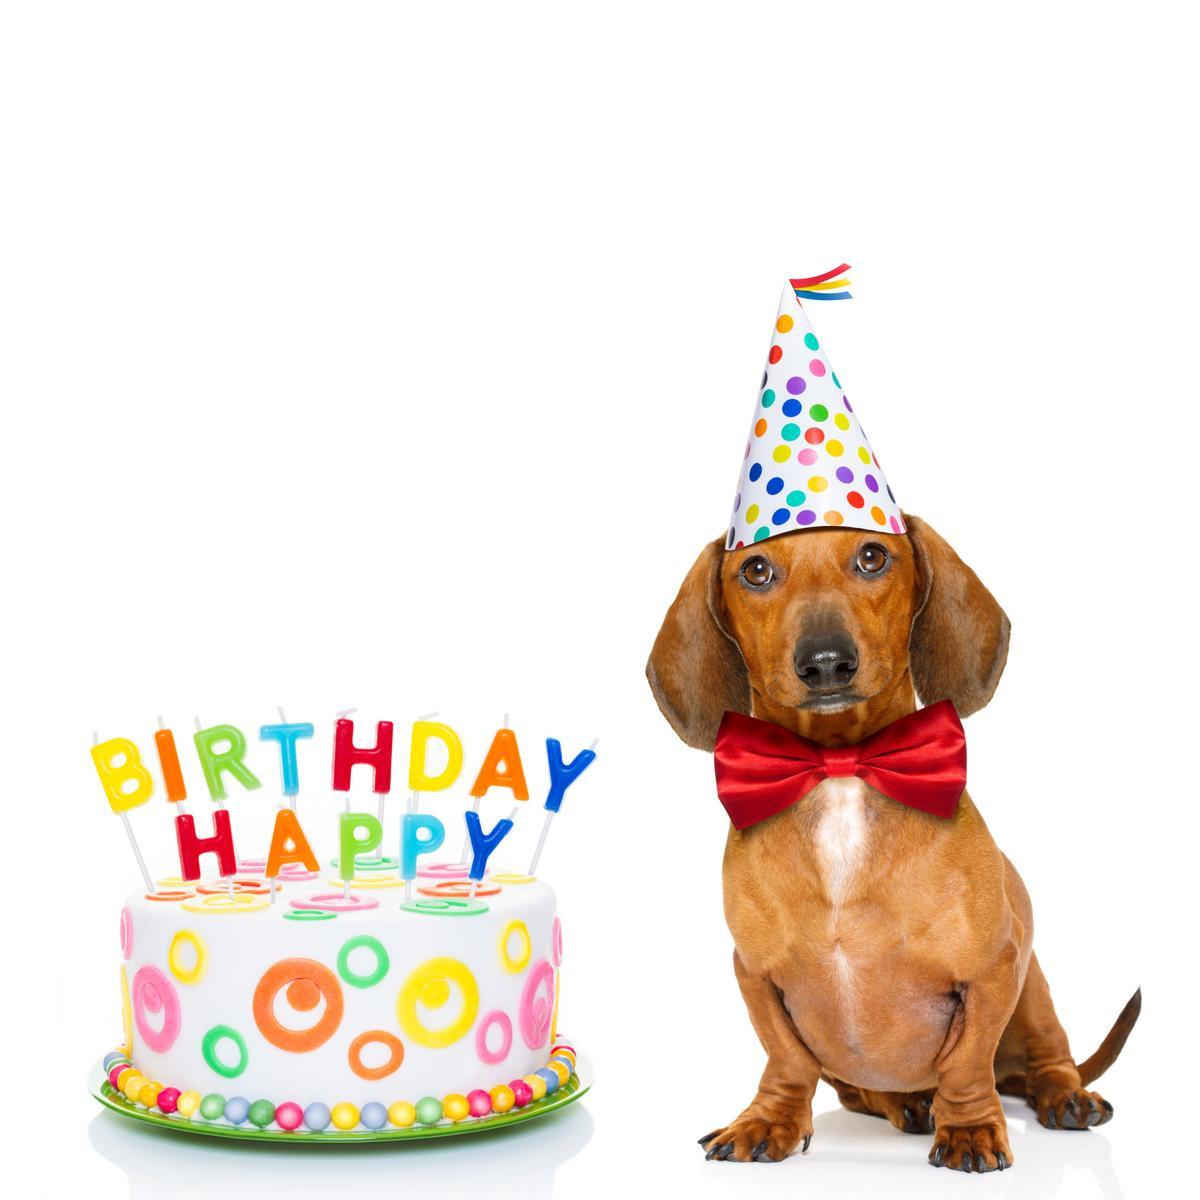 Happy Birthday Dog Quotes
 Genuinely Heartfelt Happy 20th Birthday Wishes and Quotes